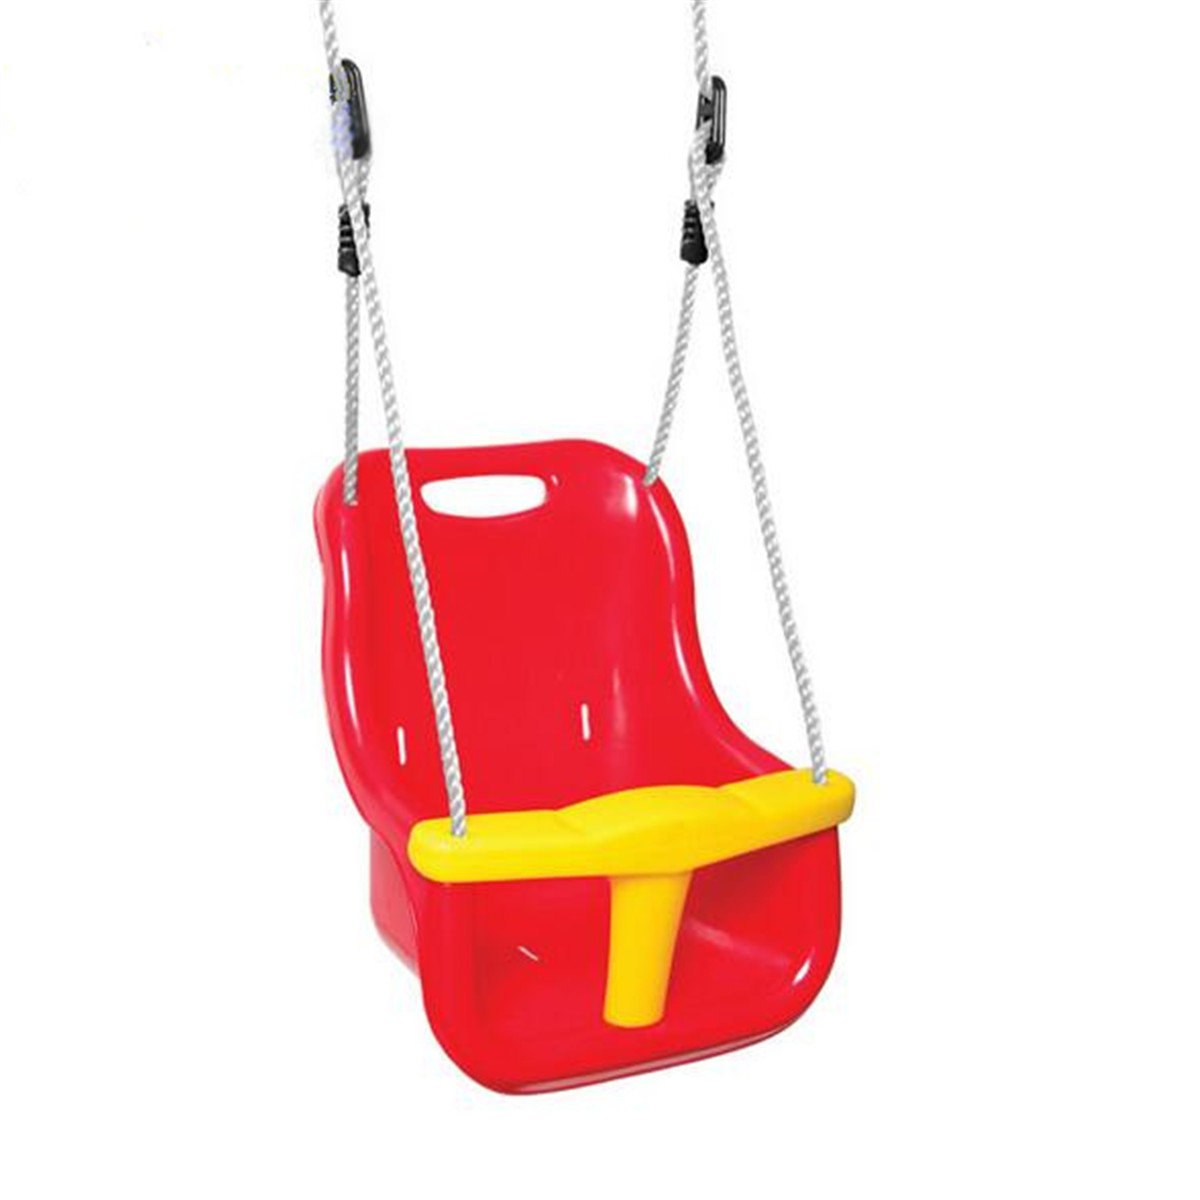 Baby-Swing-Seat-Set-Infant-to-Toddler-Secure-Detachable-Outdoor-Play-Cradle-Garden-1397178